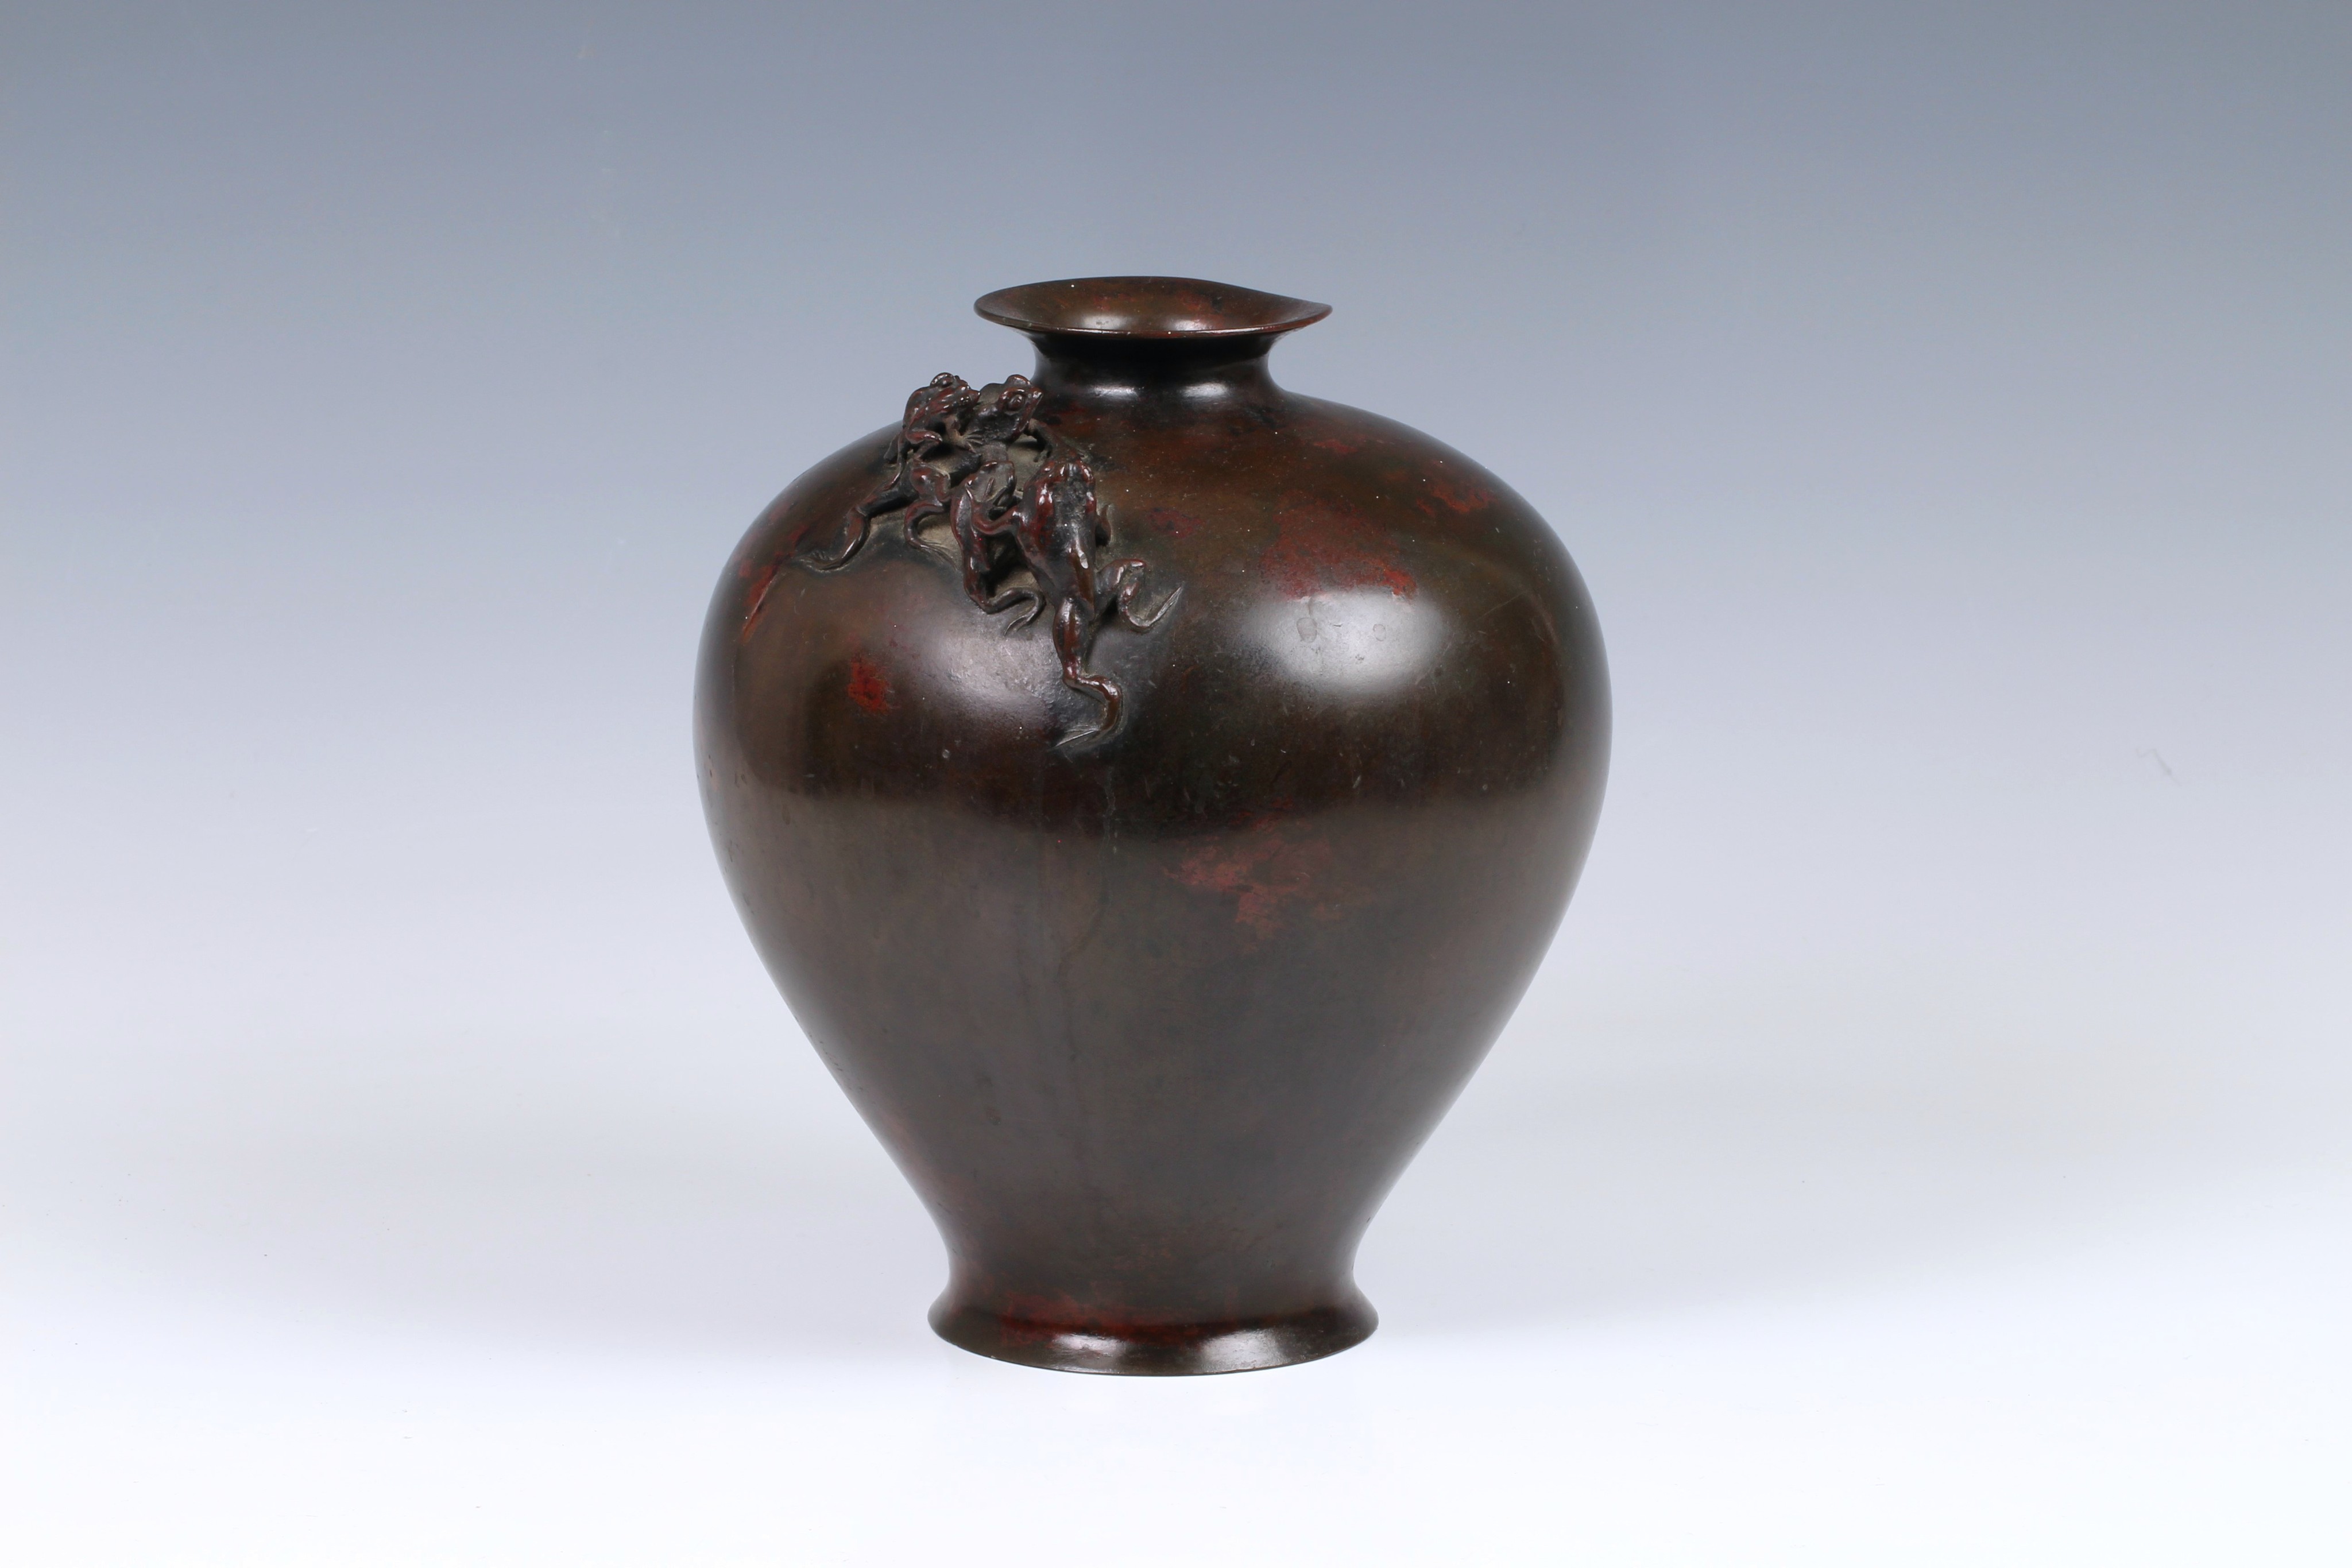 A Japanese patinated bronze vase, 19th century, of stout baluster form with everted rim and slightly